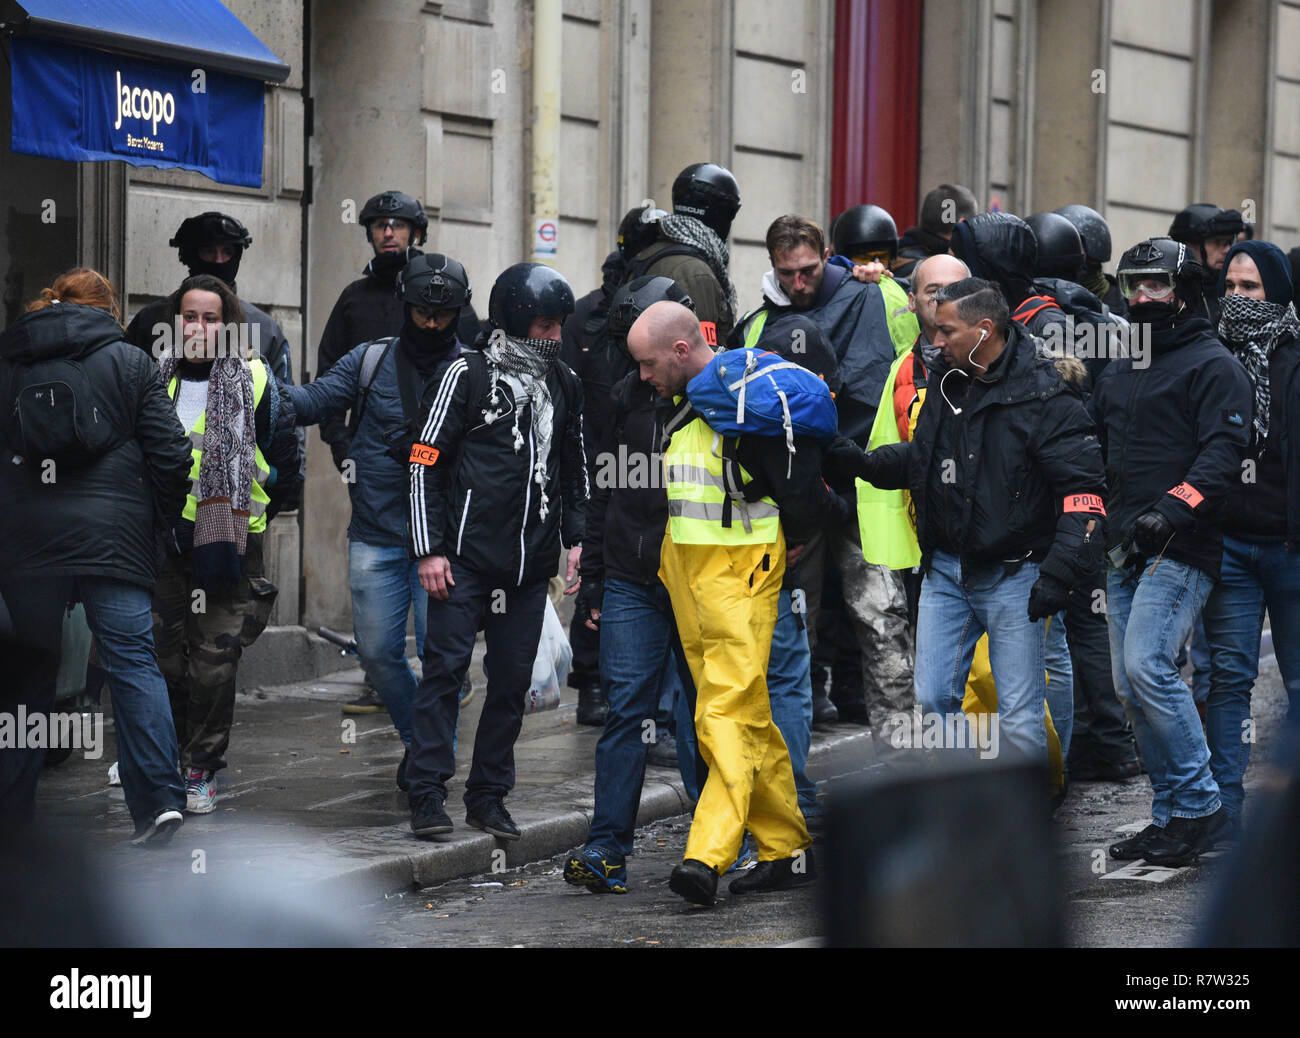 December 01, 2018 - Paris, France: French riot police in civilian clothes,  with an orange police armband, arrest Yellow vest protesters who tried to  force their way into the Champs-Elysees avenue. Des